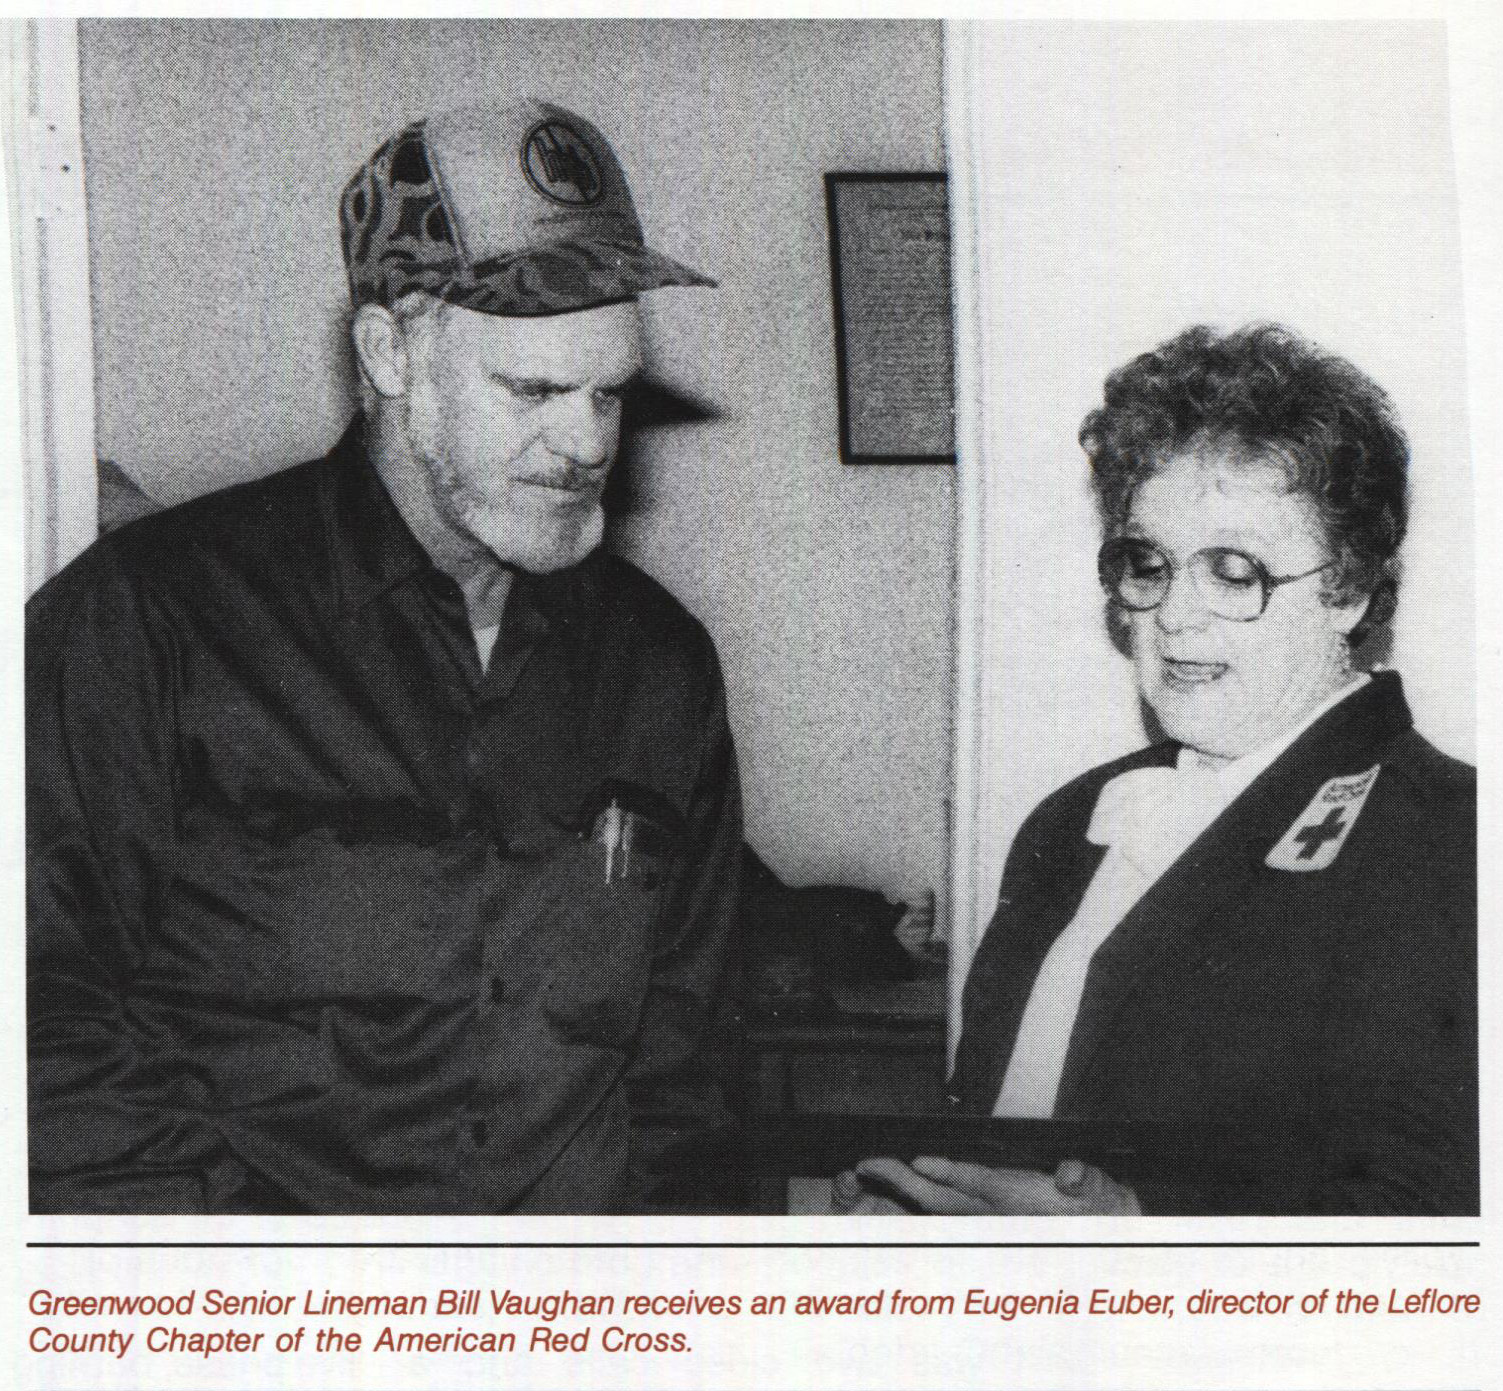 From our archives, Bill Vaughan receives an award for helping to save a colleague's life.